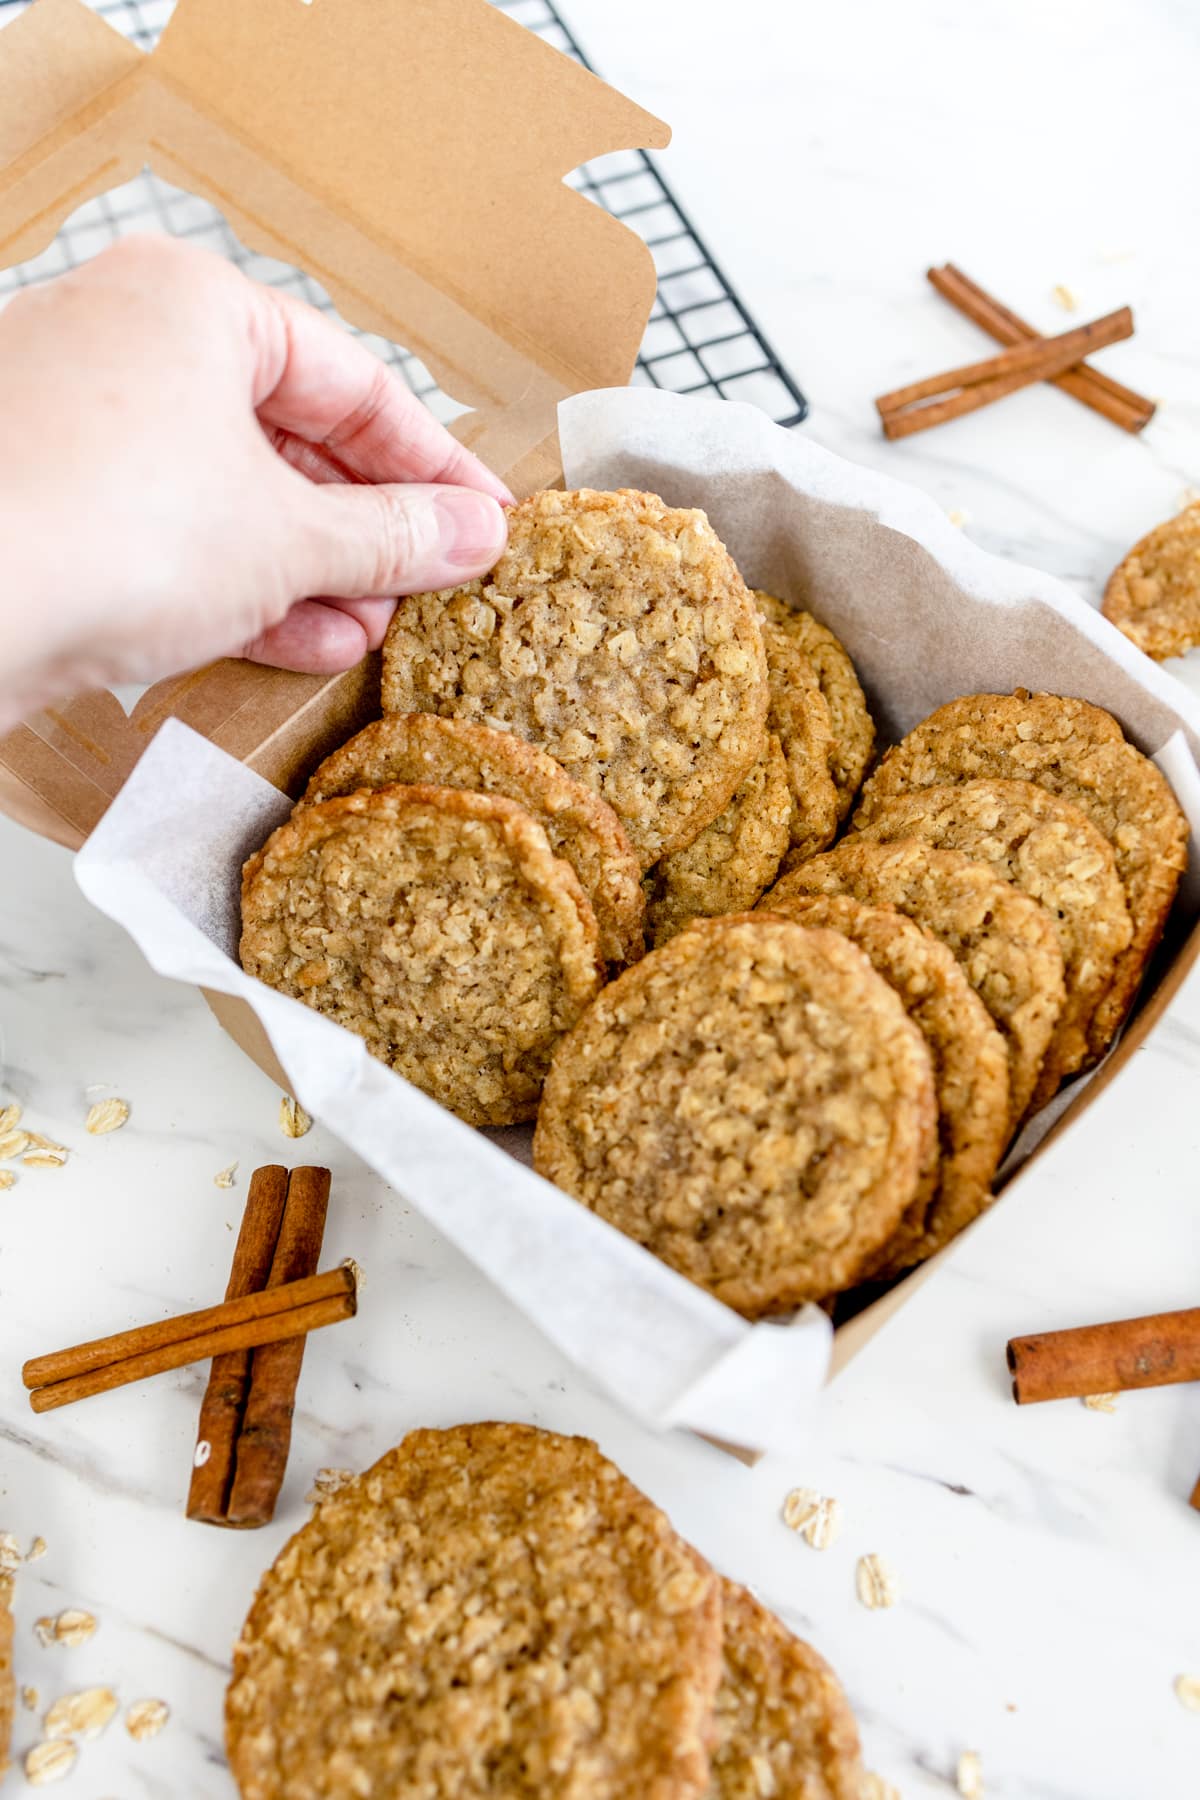 Oatmeal Cookies from bakery box